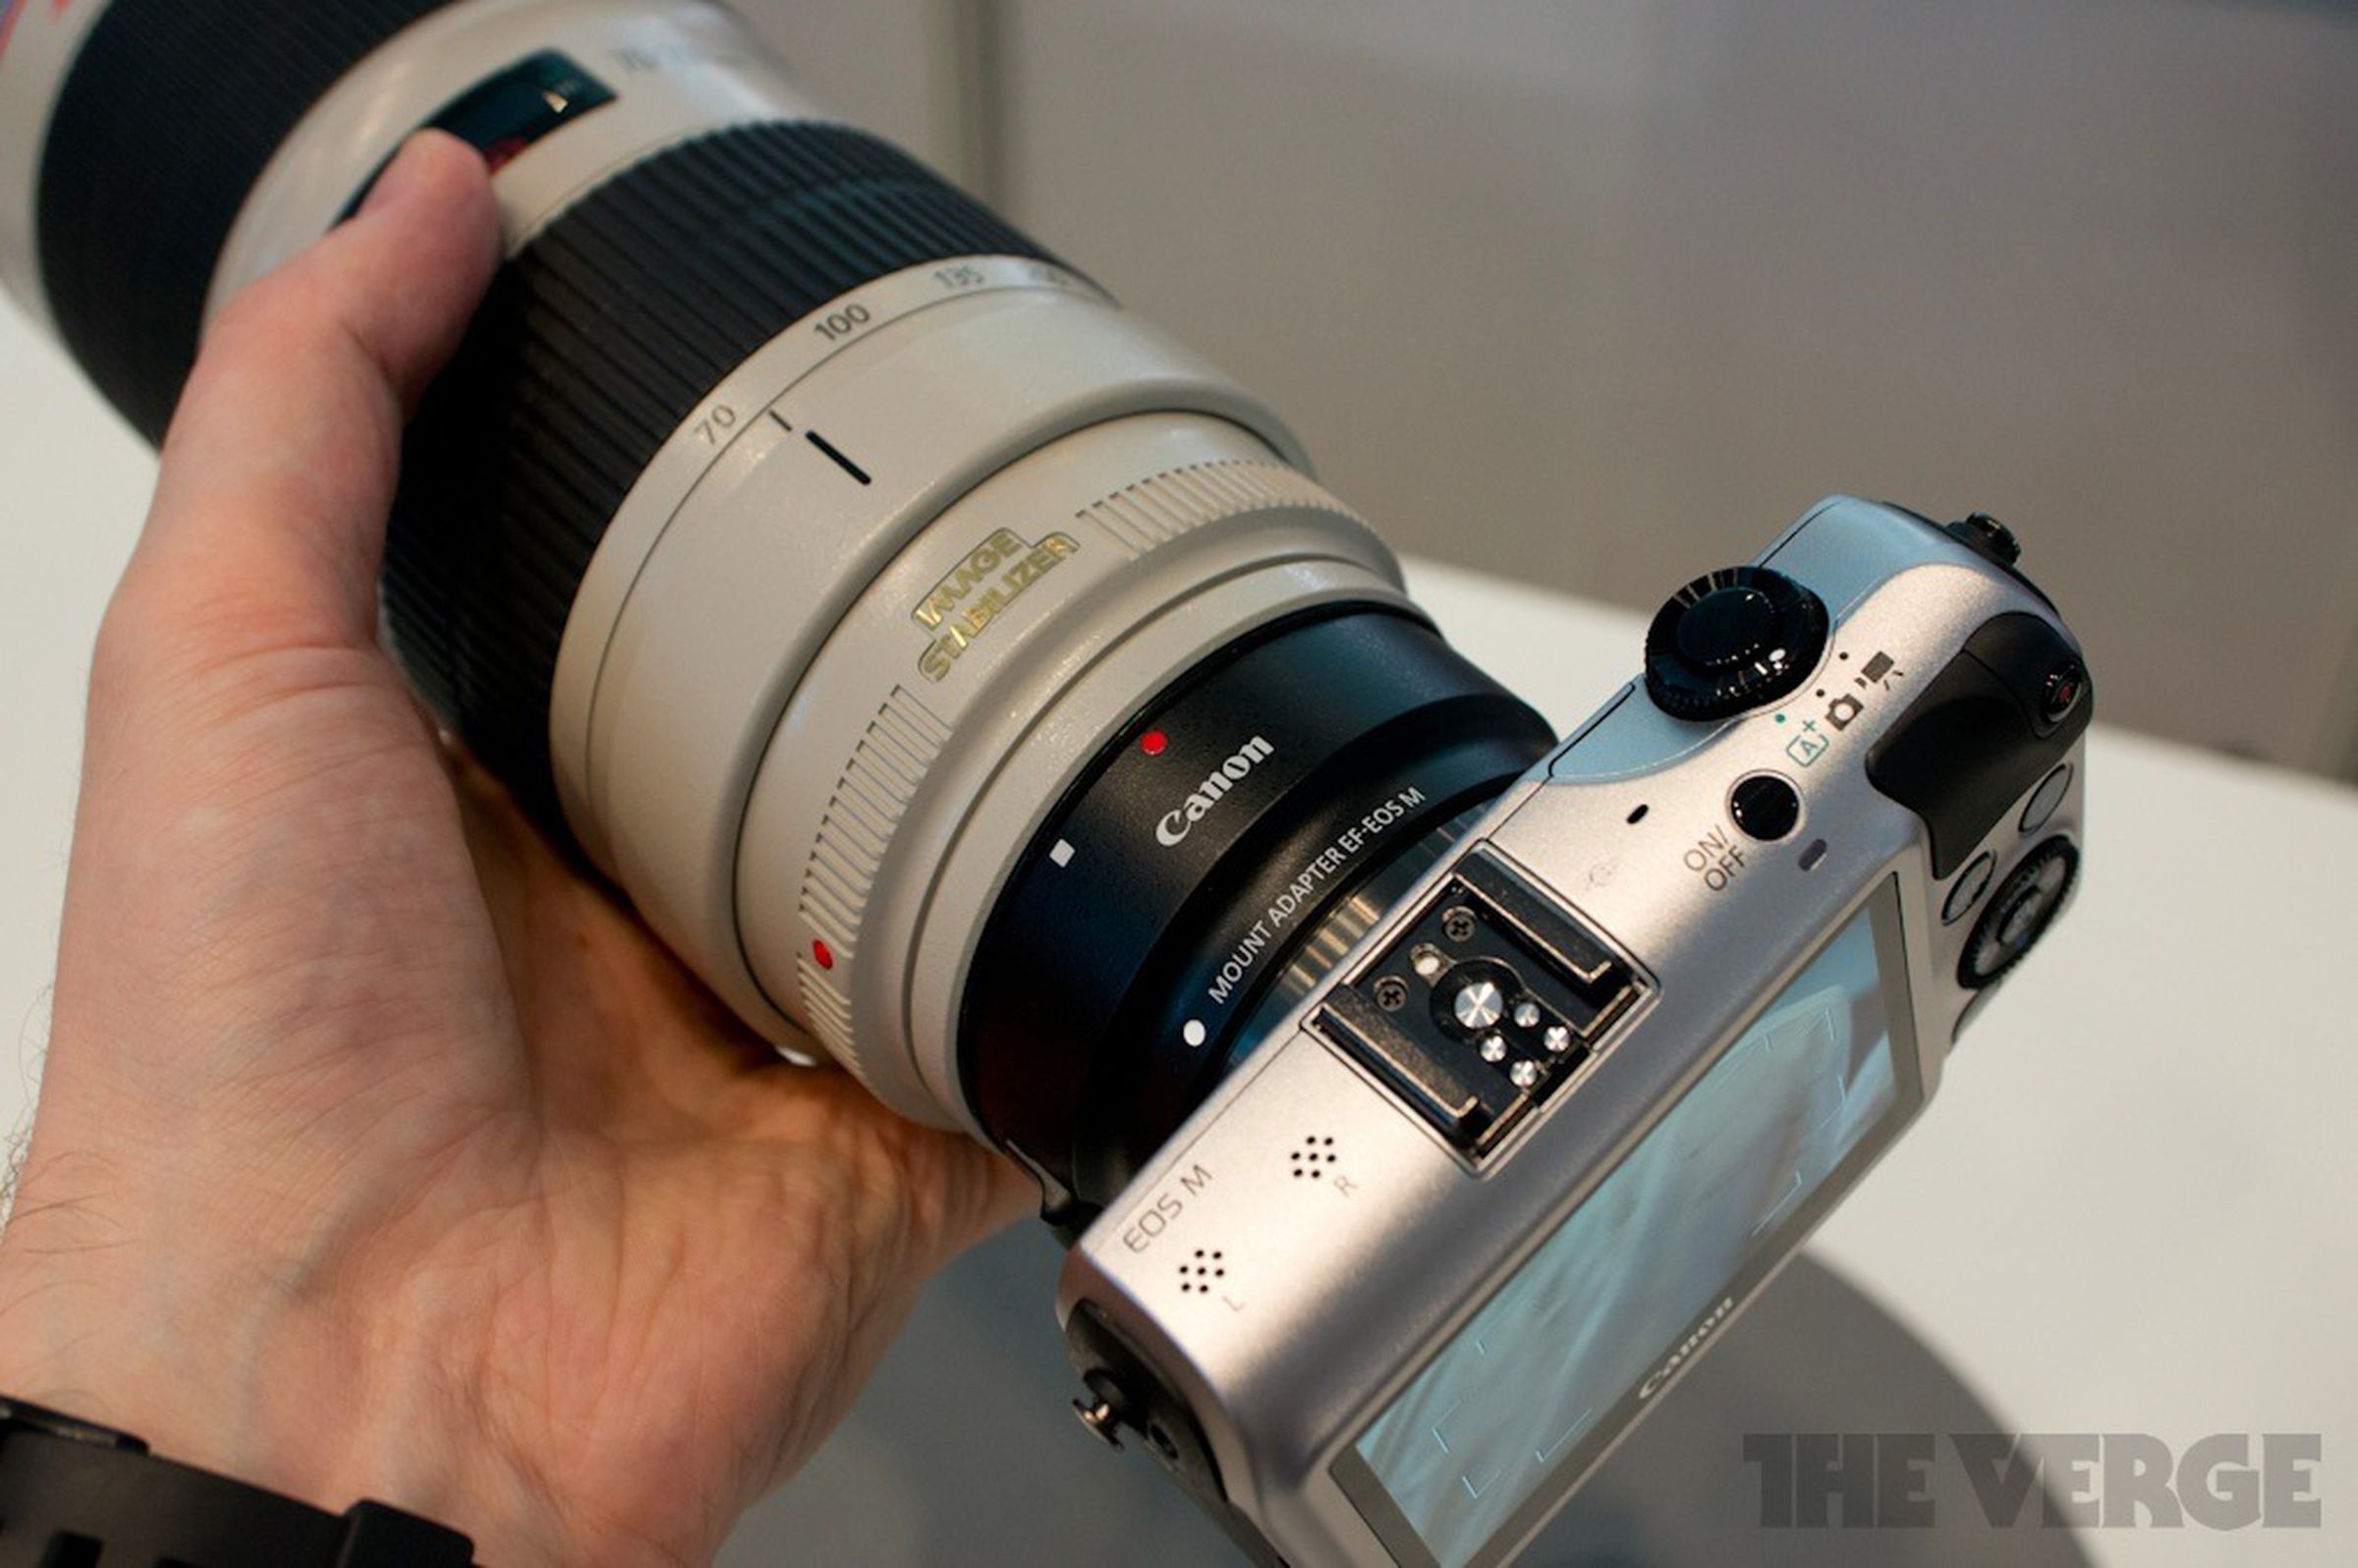 Canon EOS M hands-on